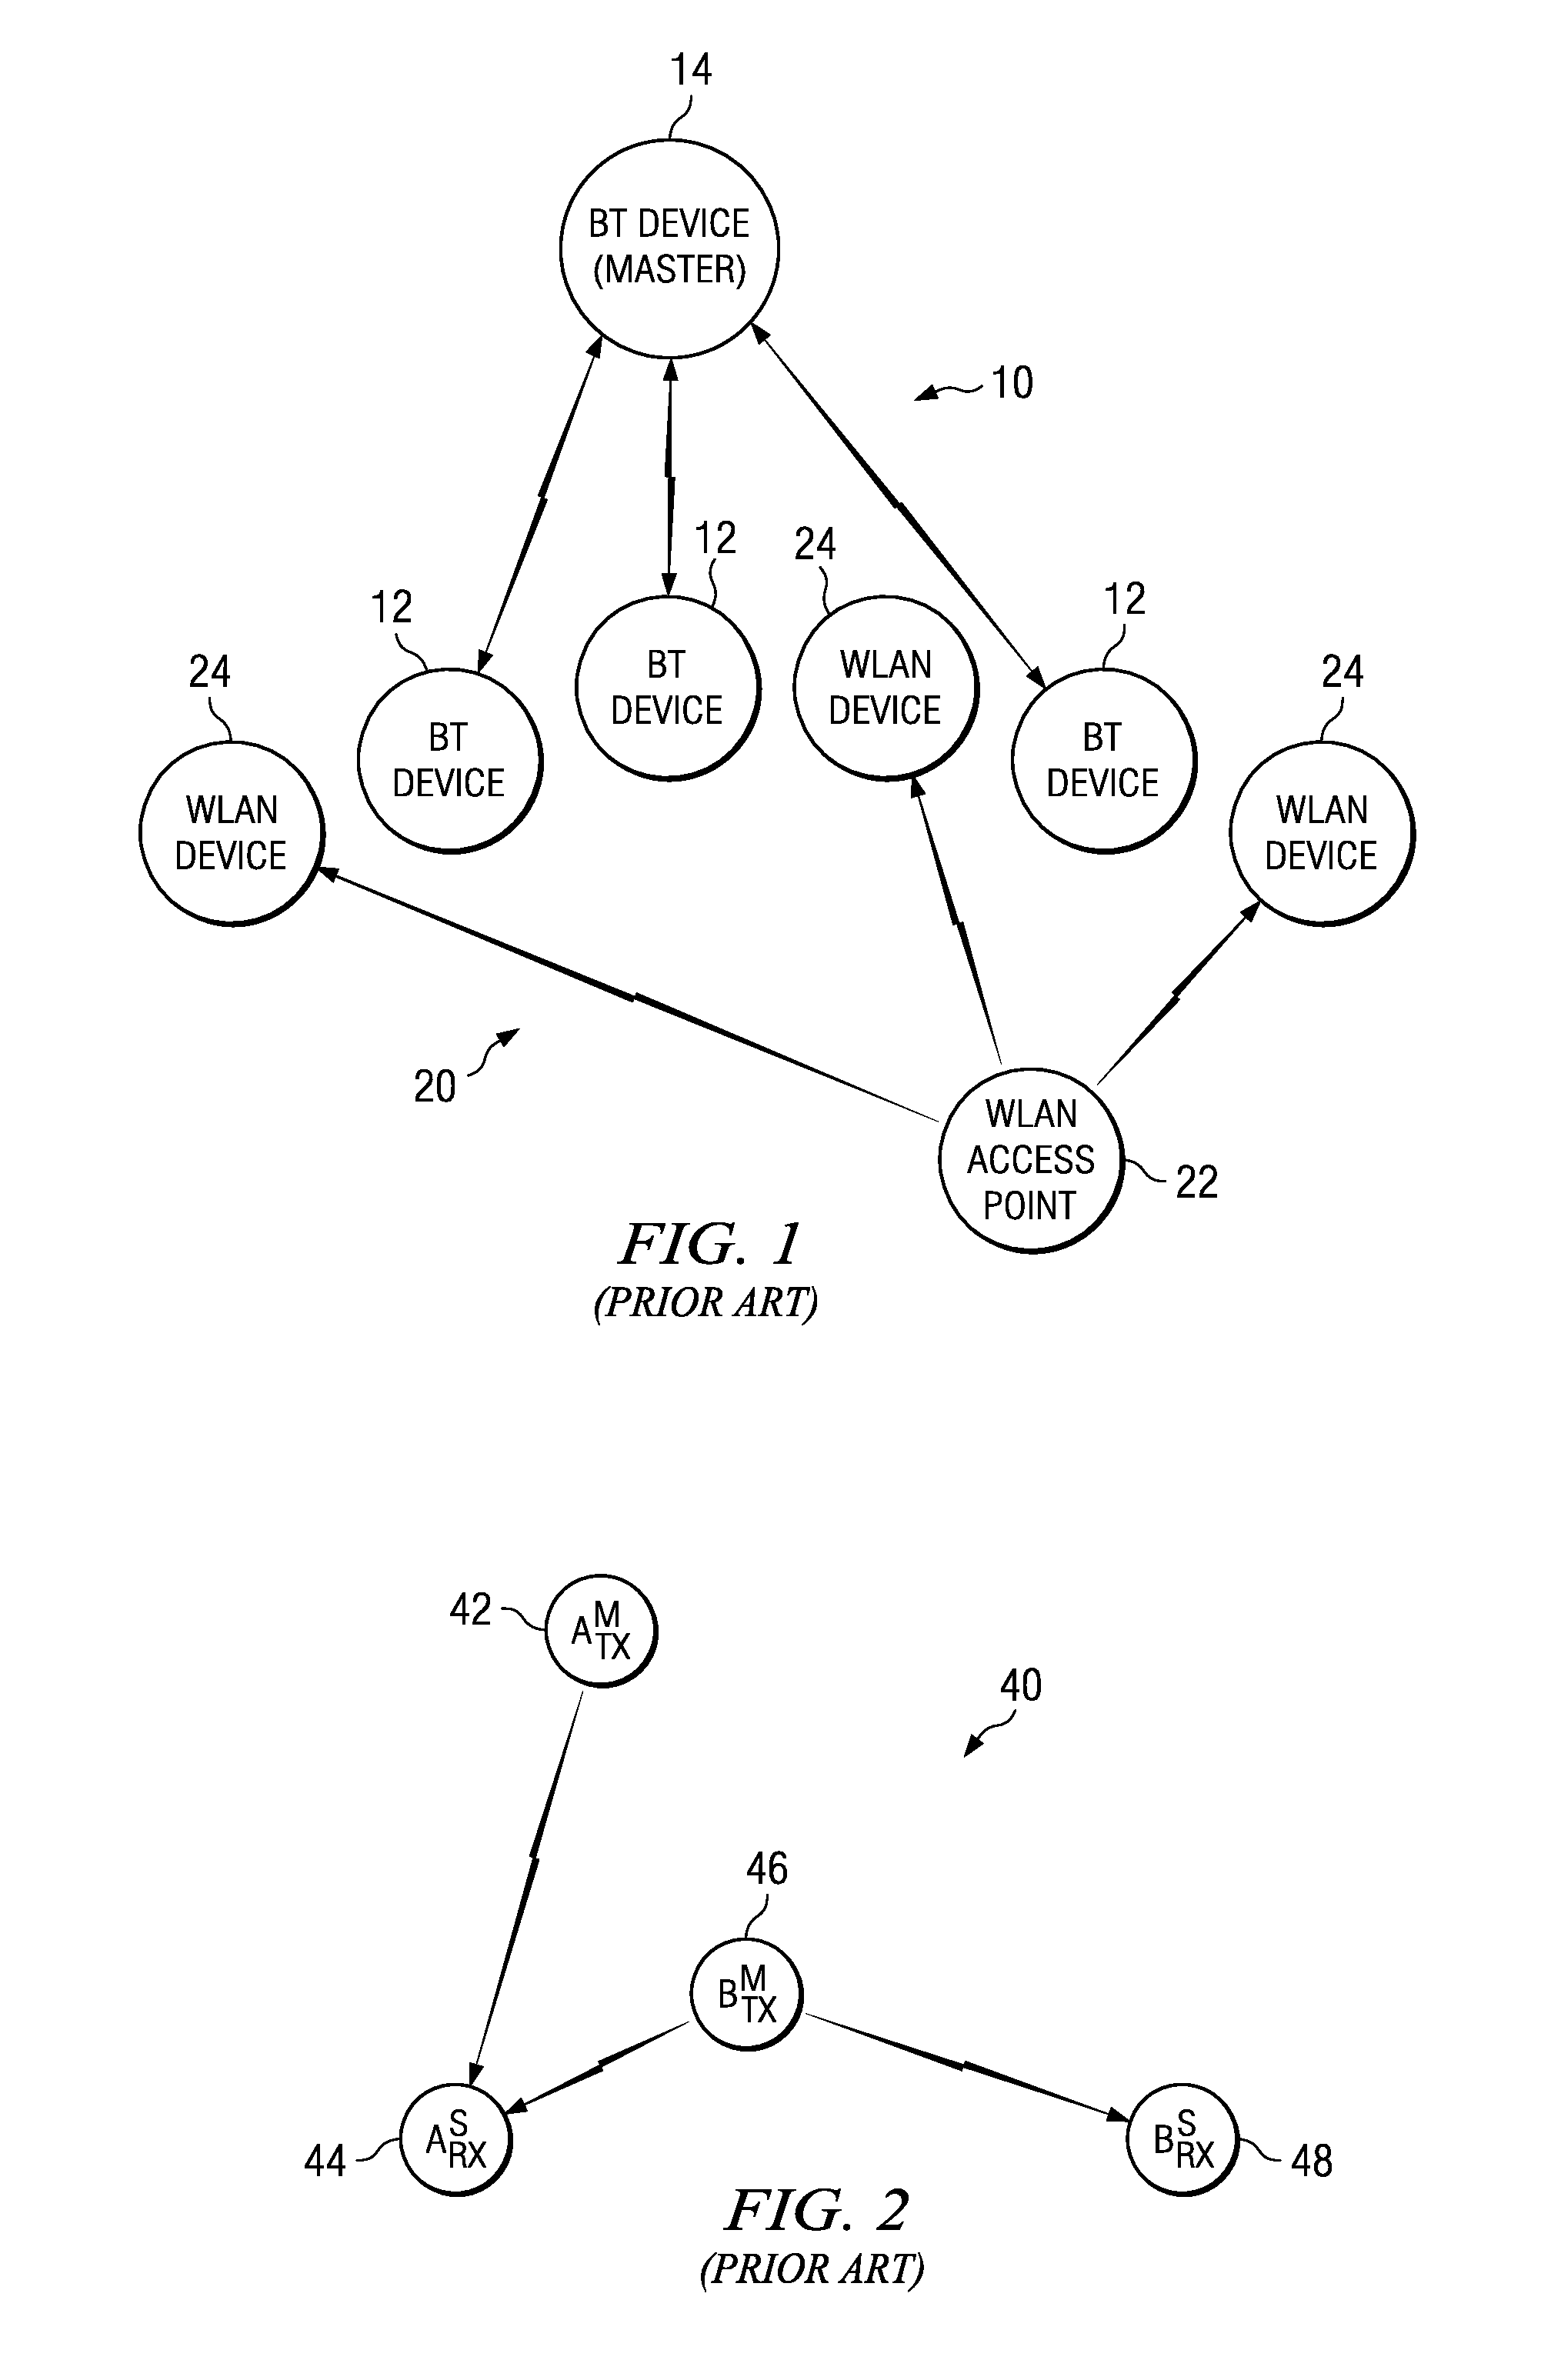 System and method of adaptive frequency hopping with look ahead interference prediction